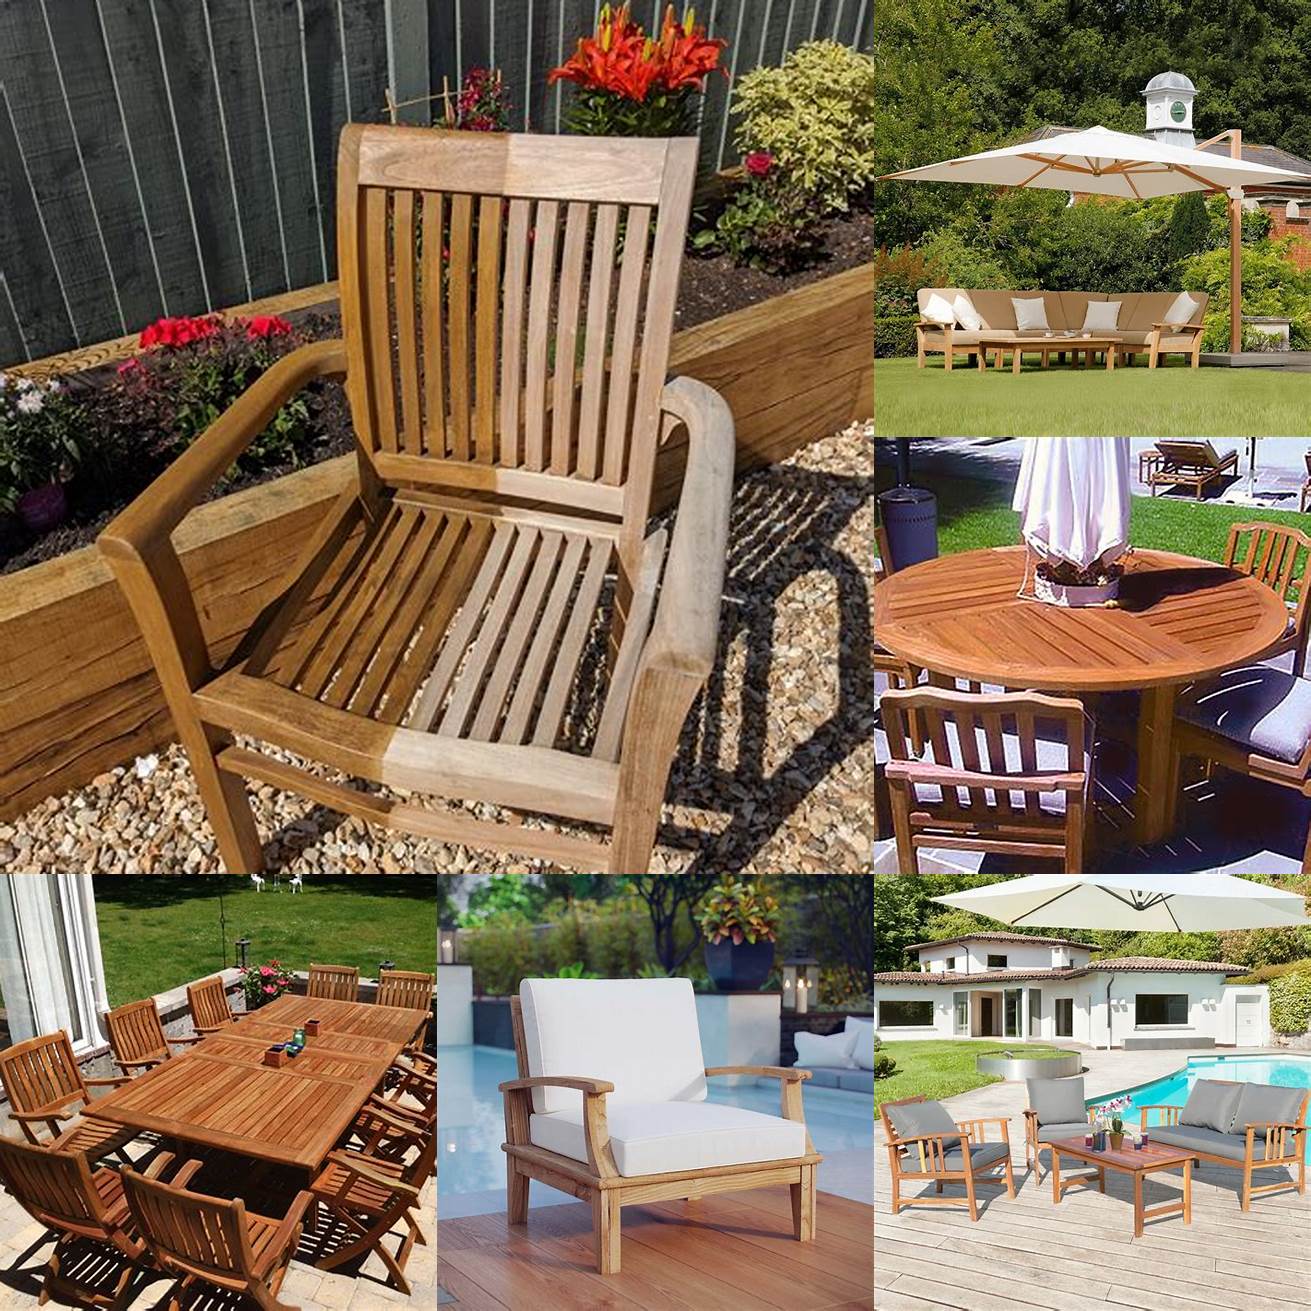 Protecting Teak Outdoor Furniture from the Sun